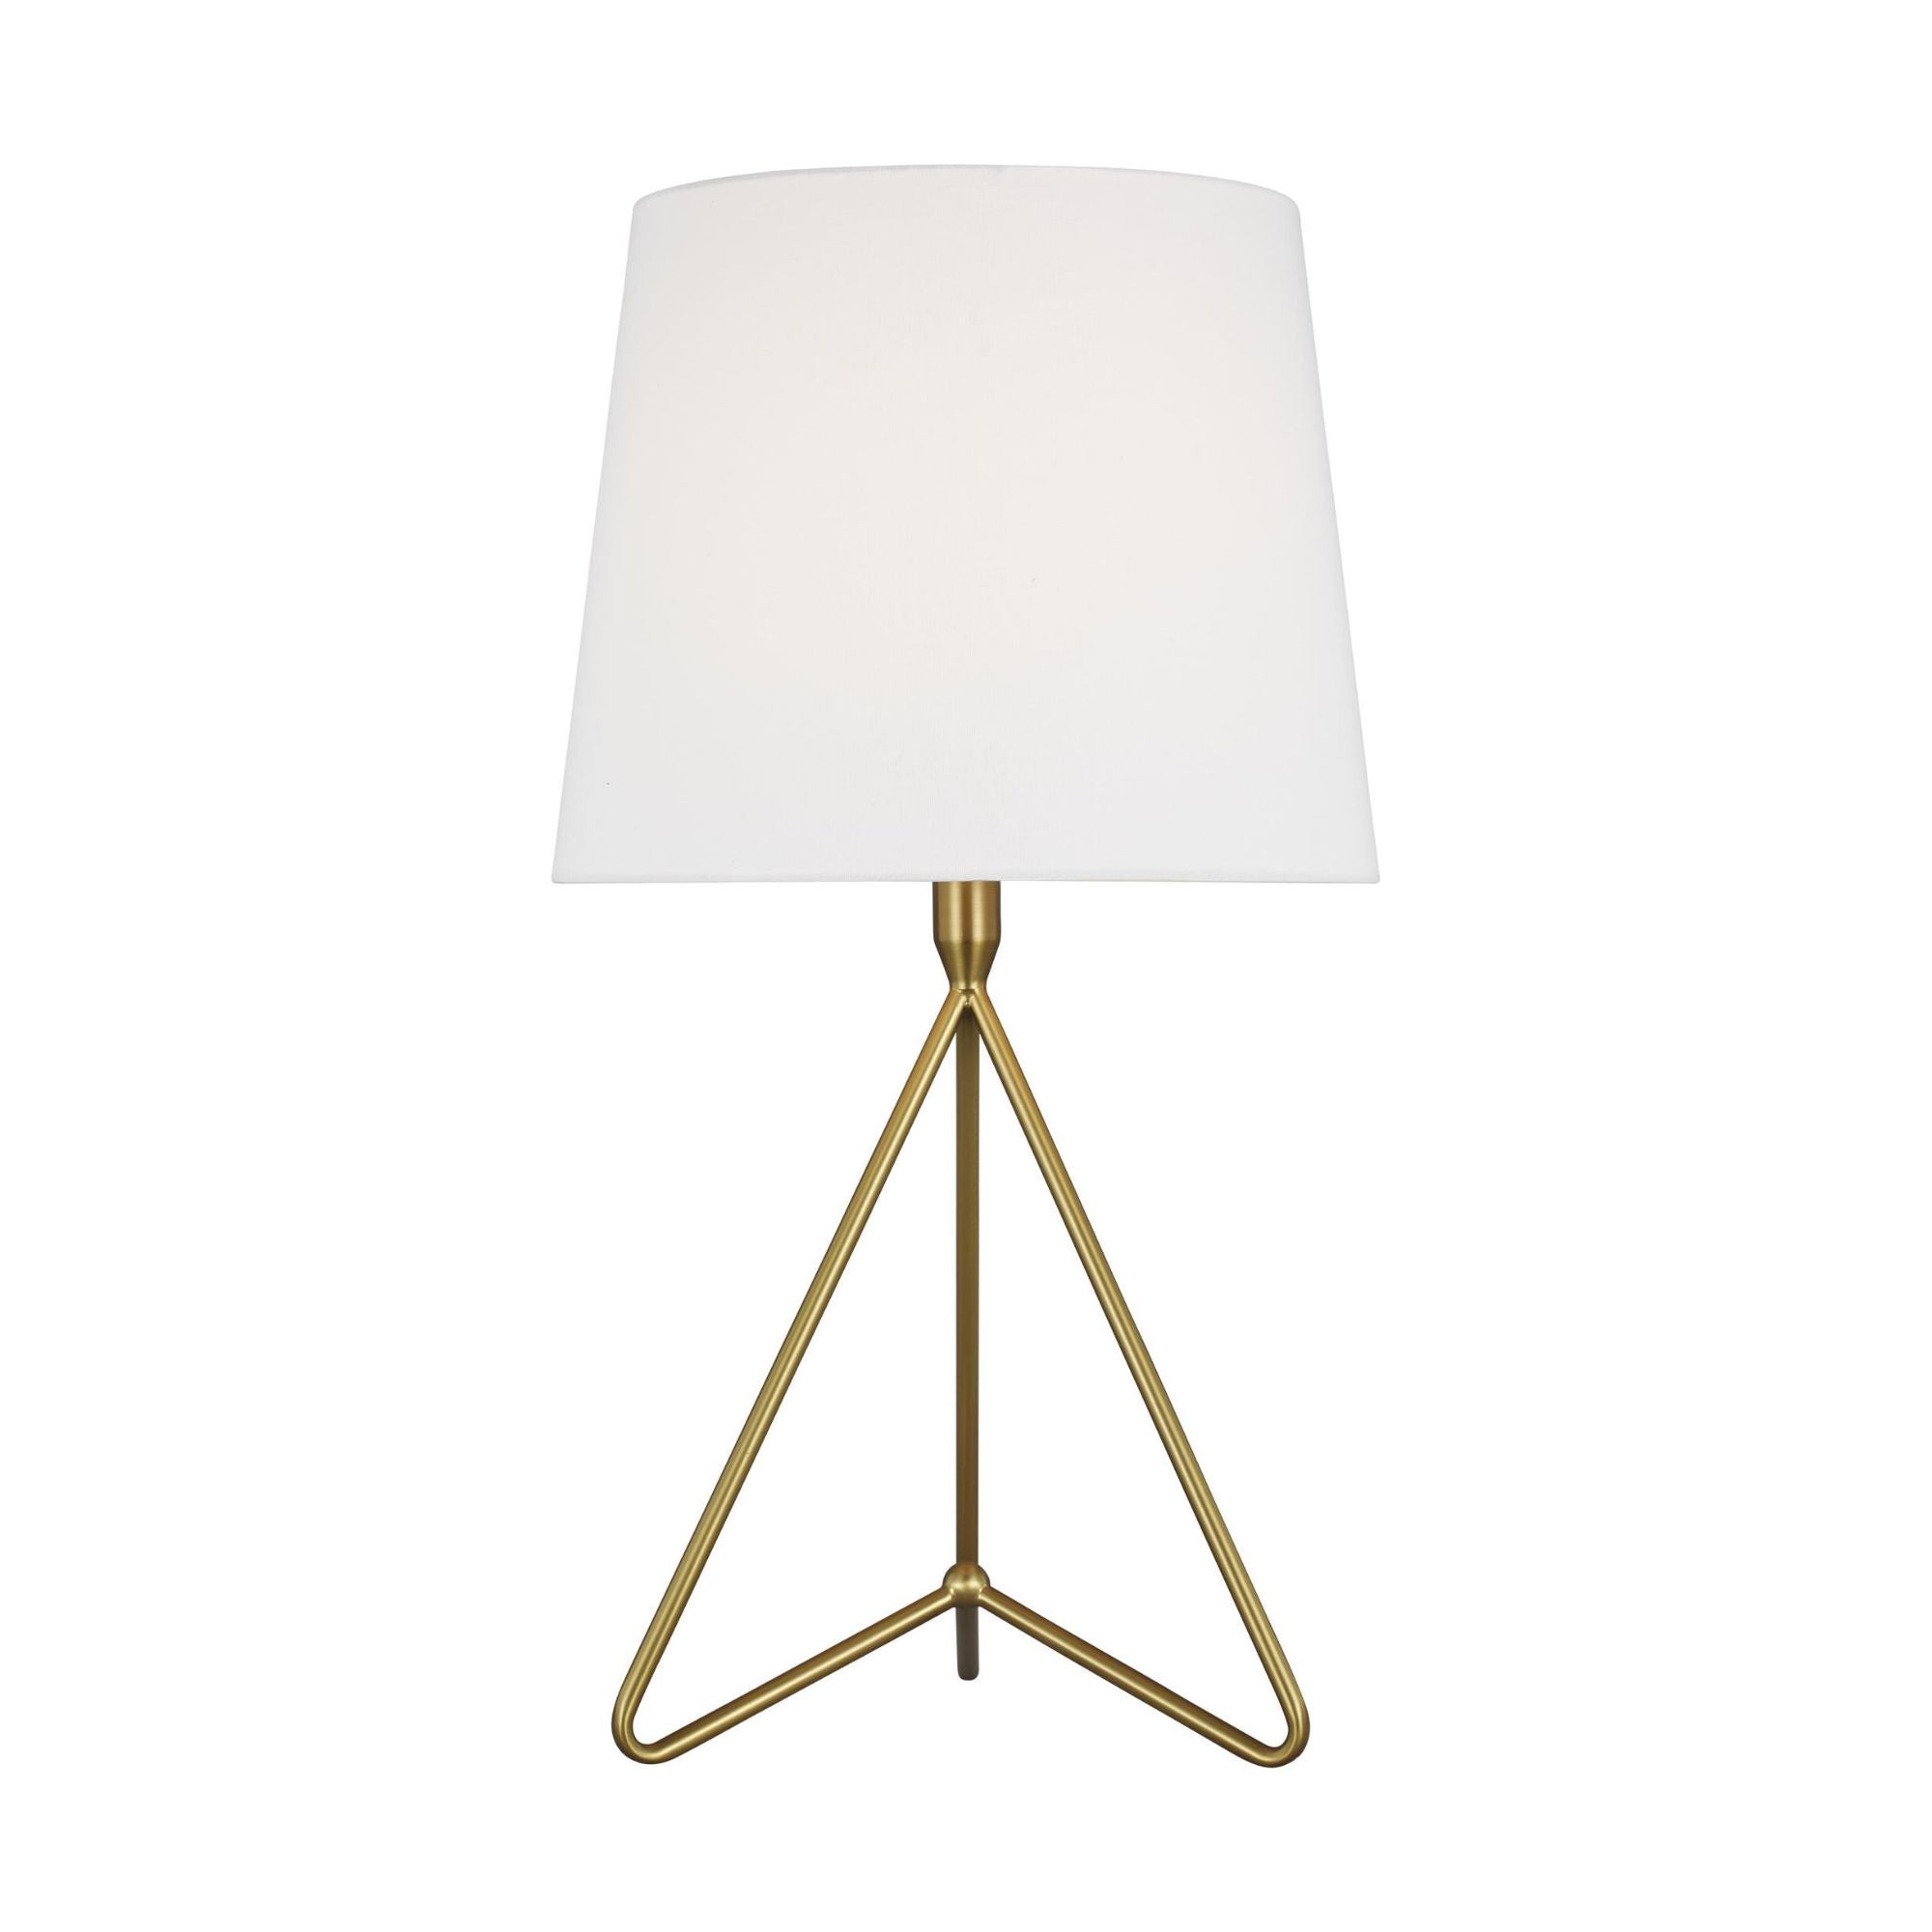 Thomas O'Brien Dylan Tall Table Lamp in Burnished Brass